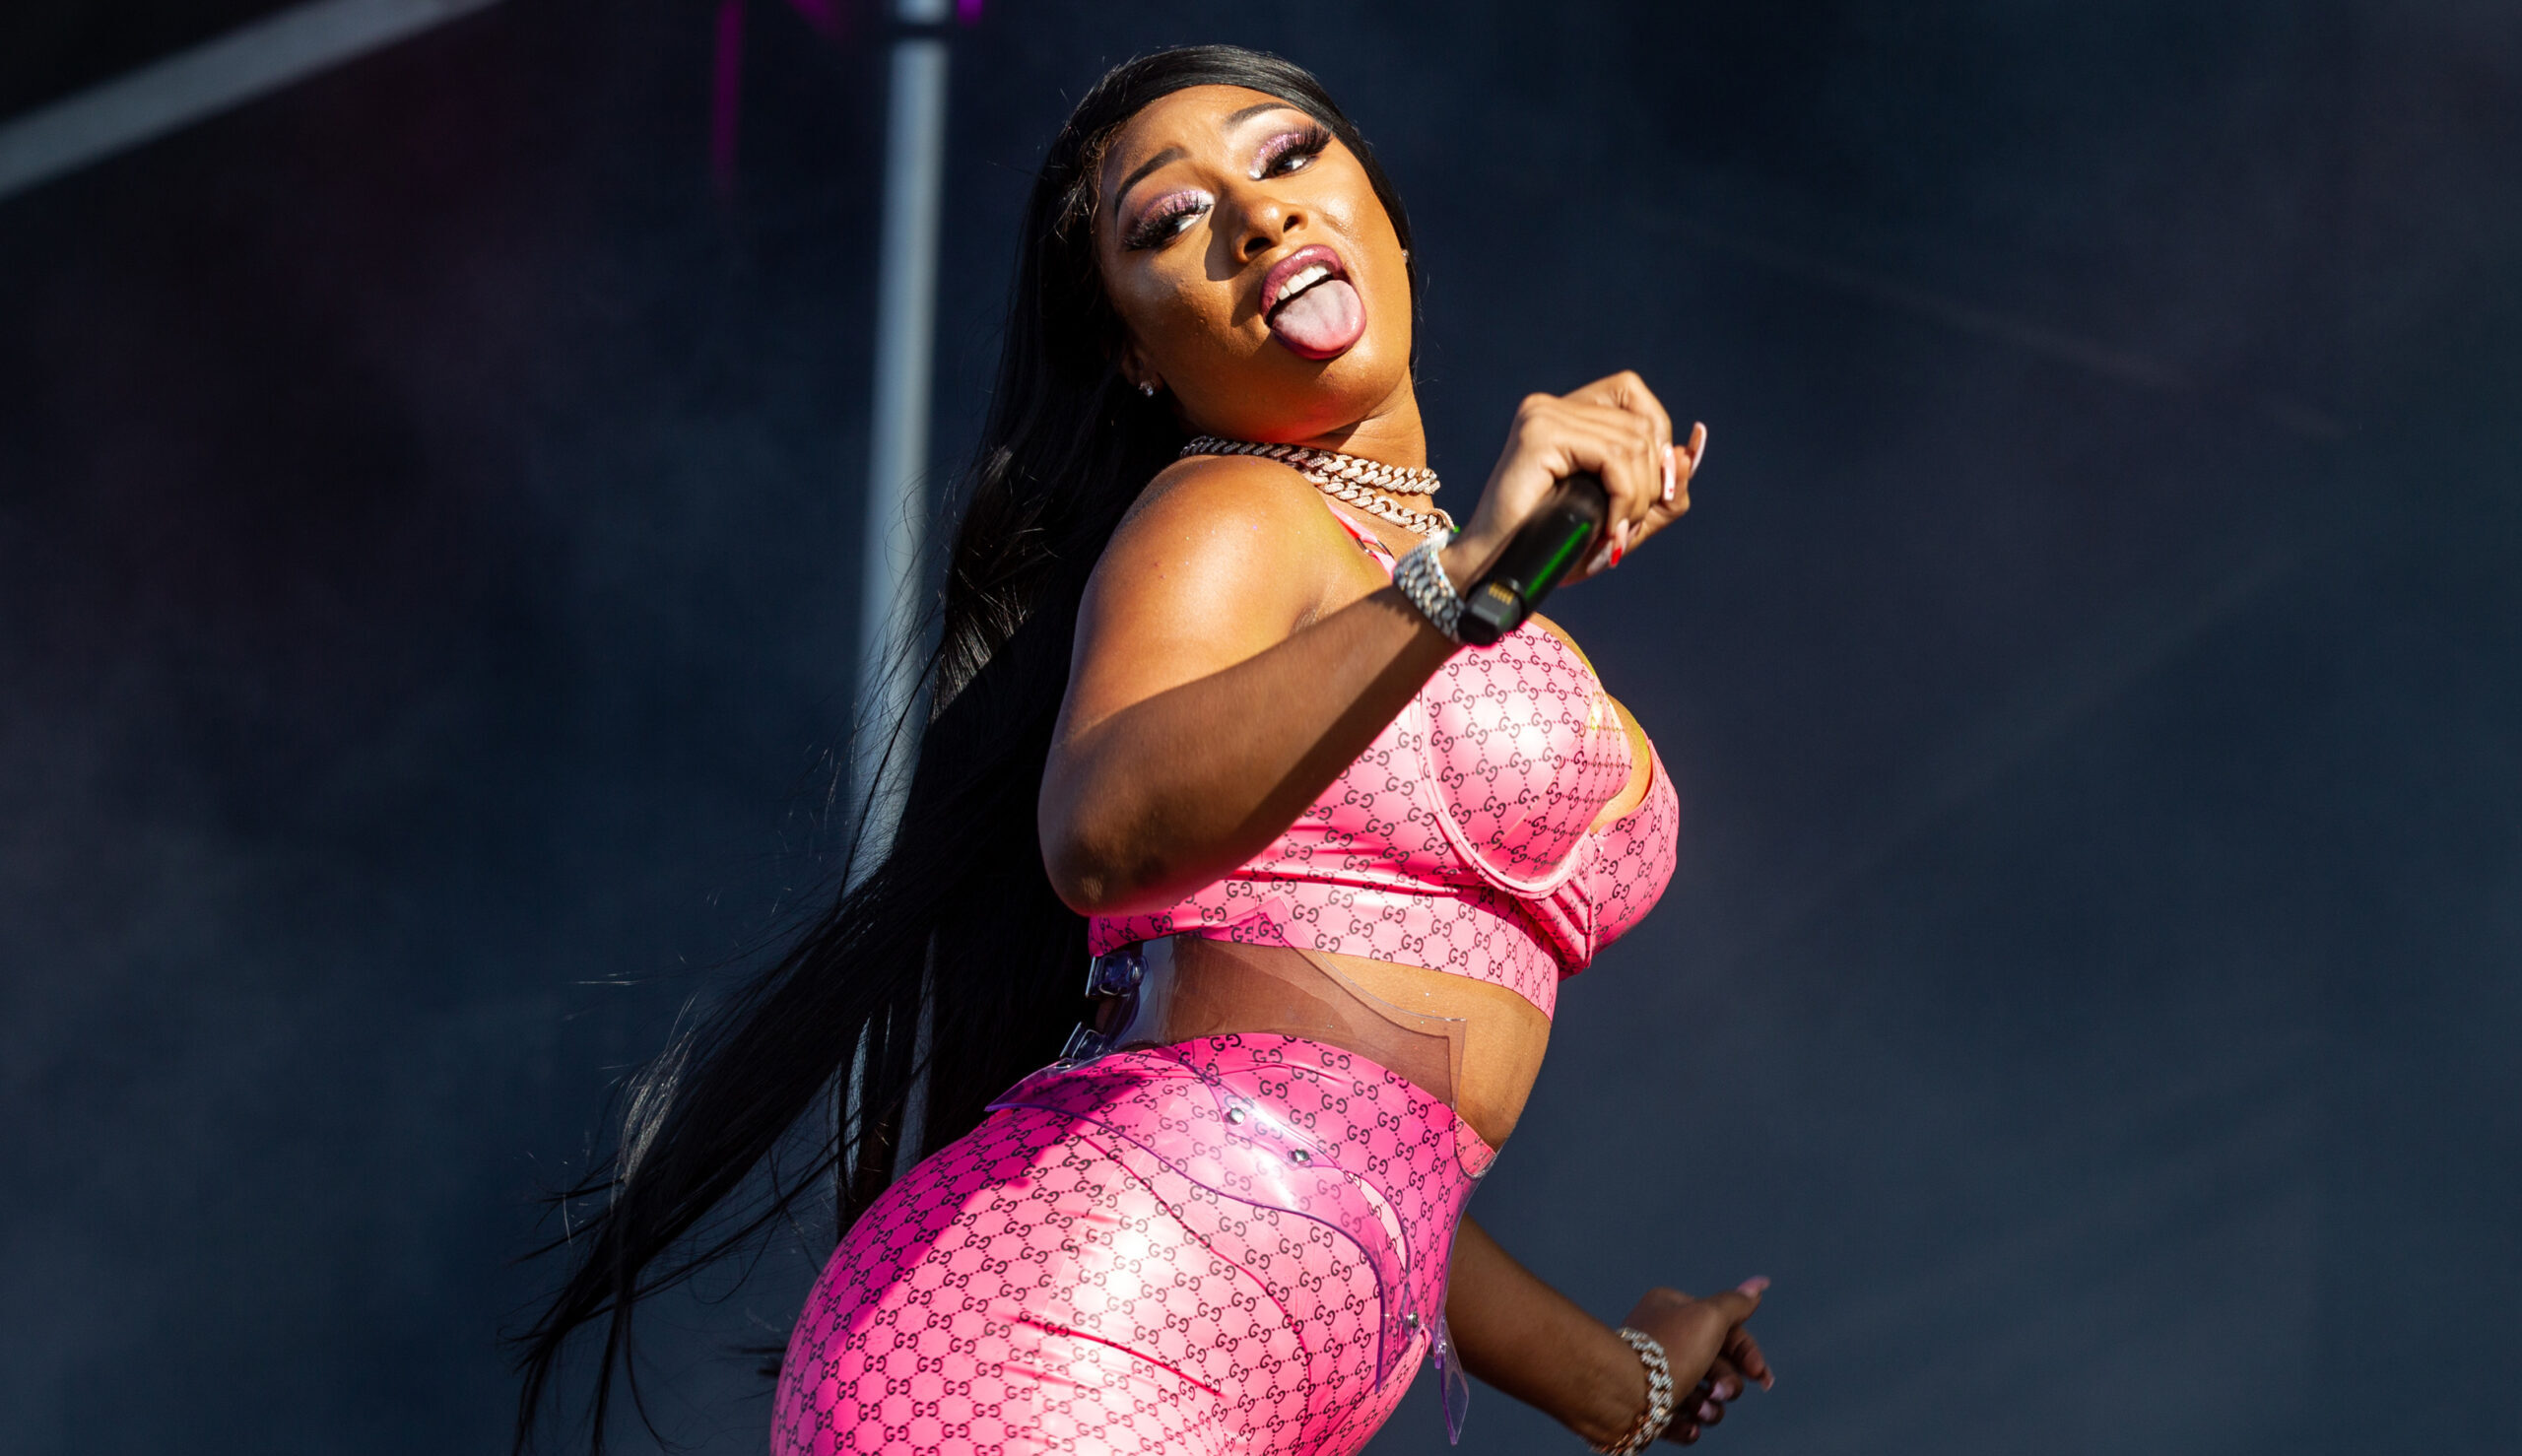 Megan Thee Stallion Is Unbossed And That’s Why We Love Her